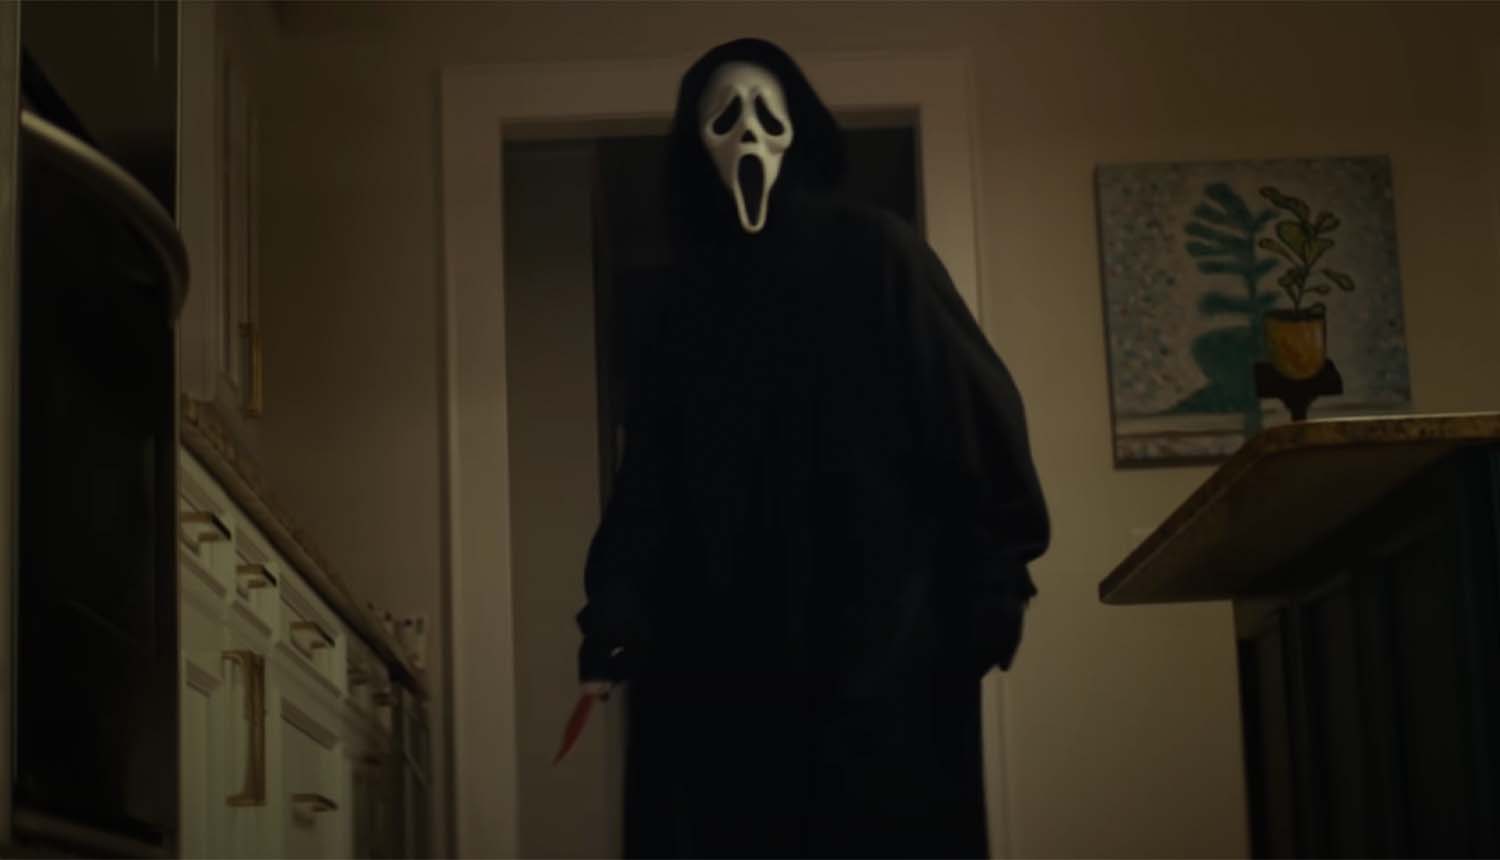 Scream is back! But does the horror genre need Ghostface any more